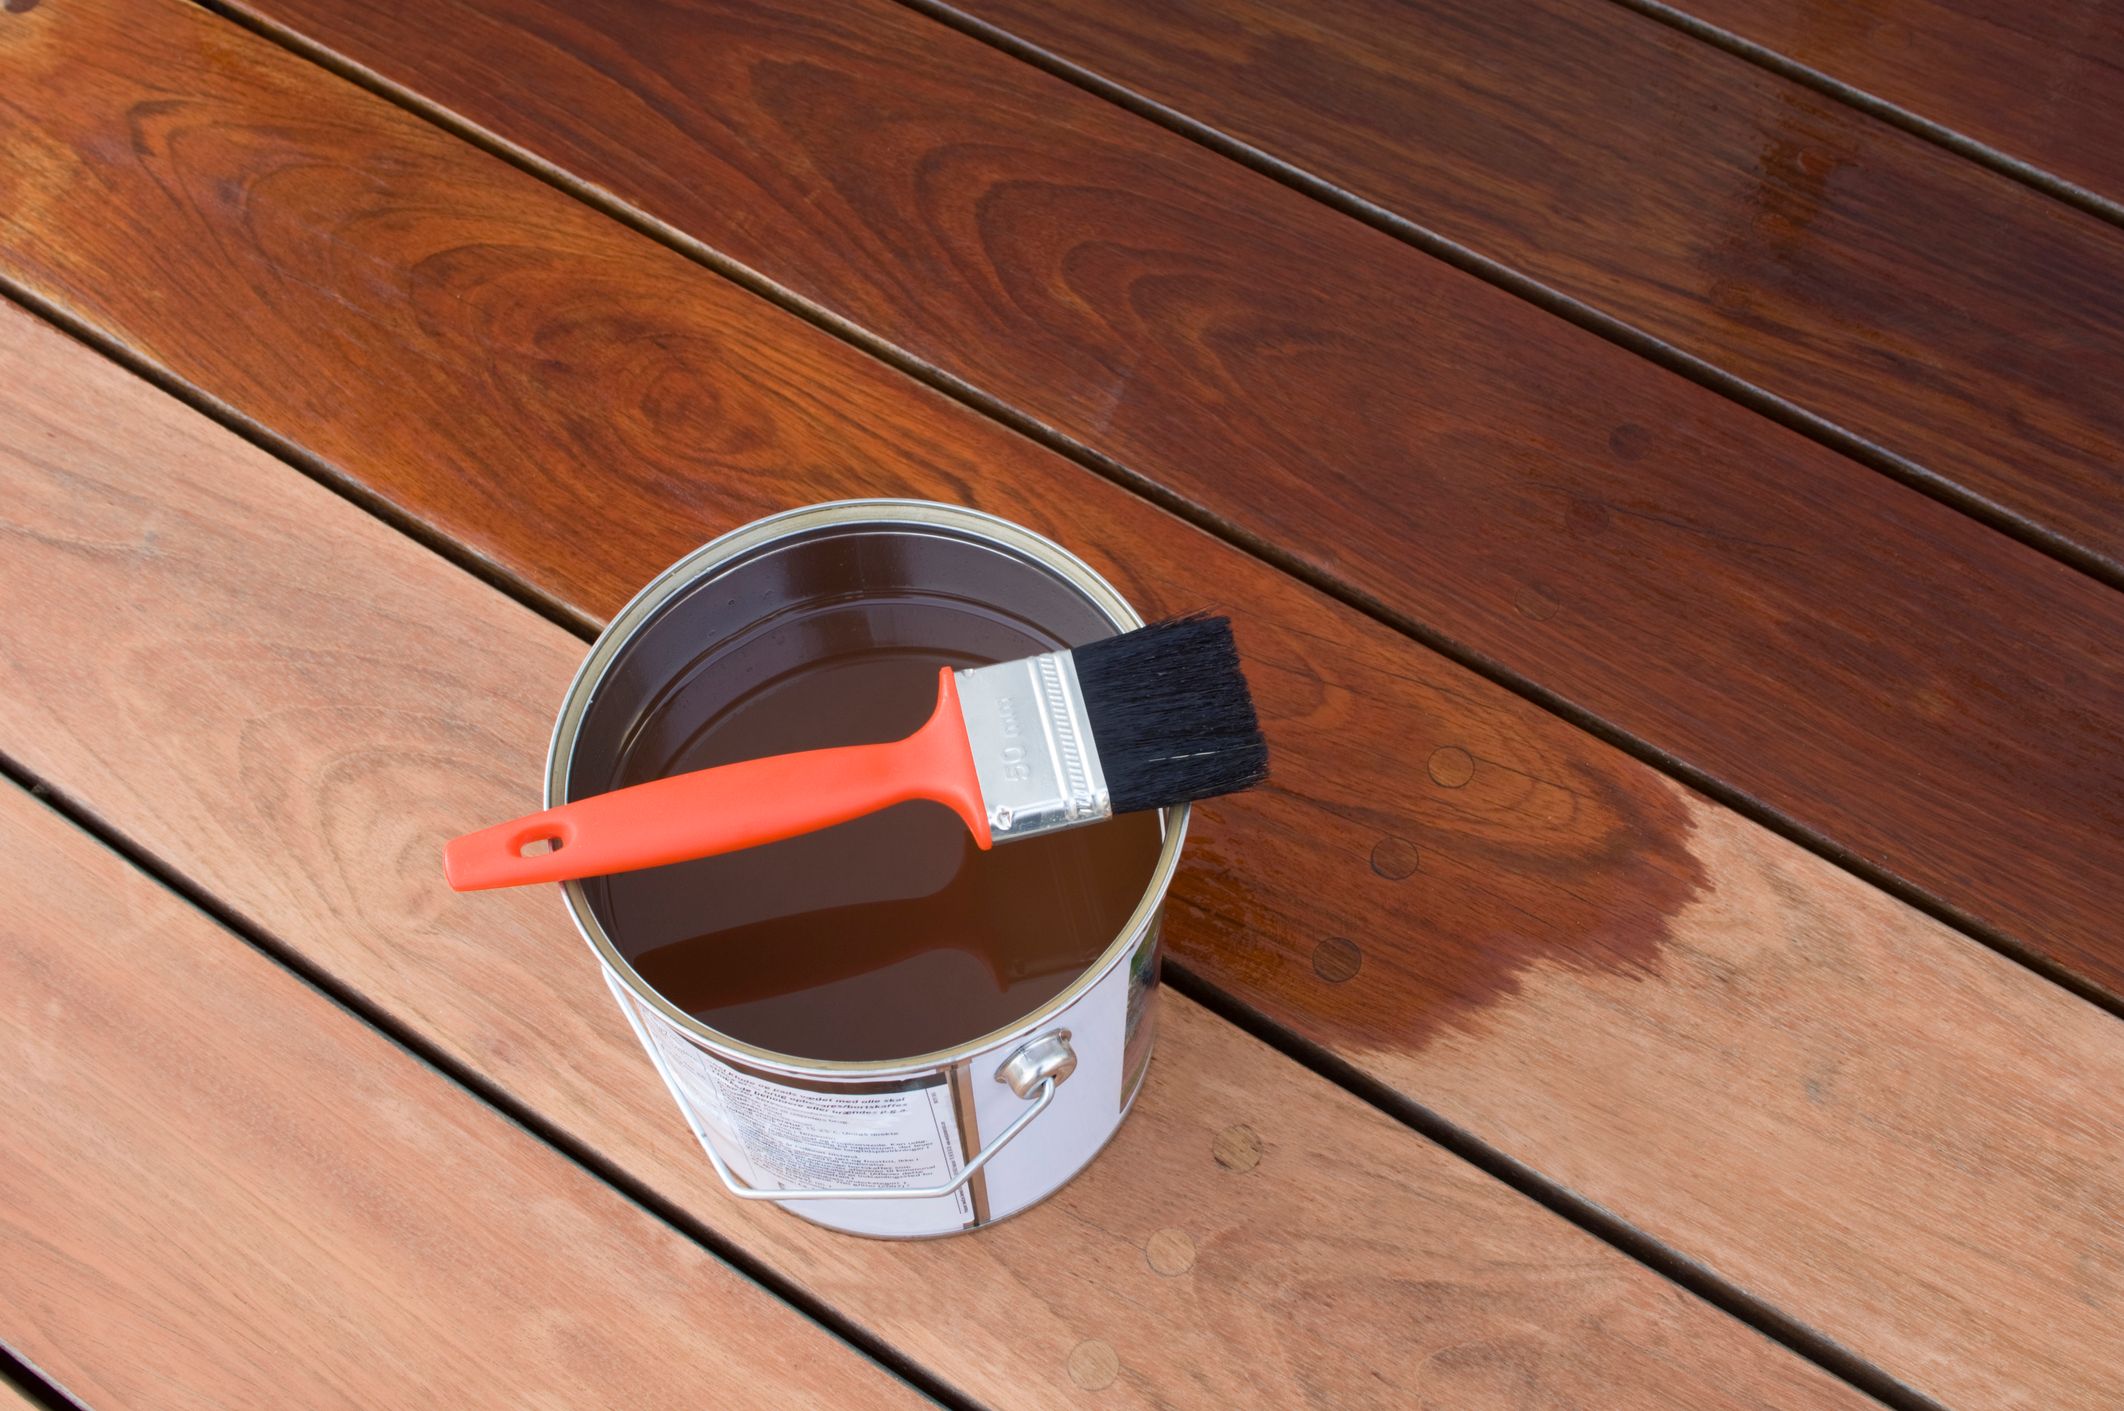 Boosting Property Value with Durable Outdoor Spaces: A Guide to Deck Maintenance and Protection